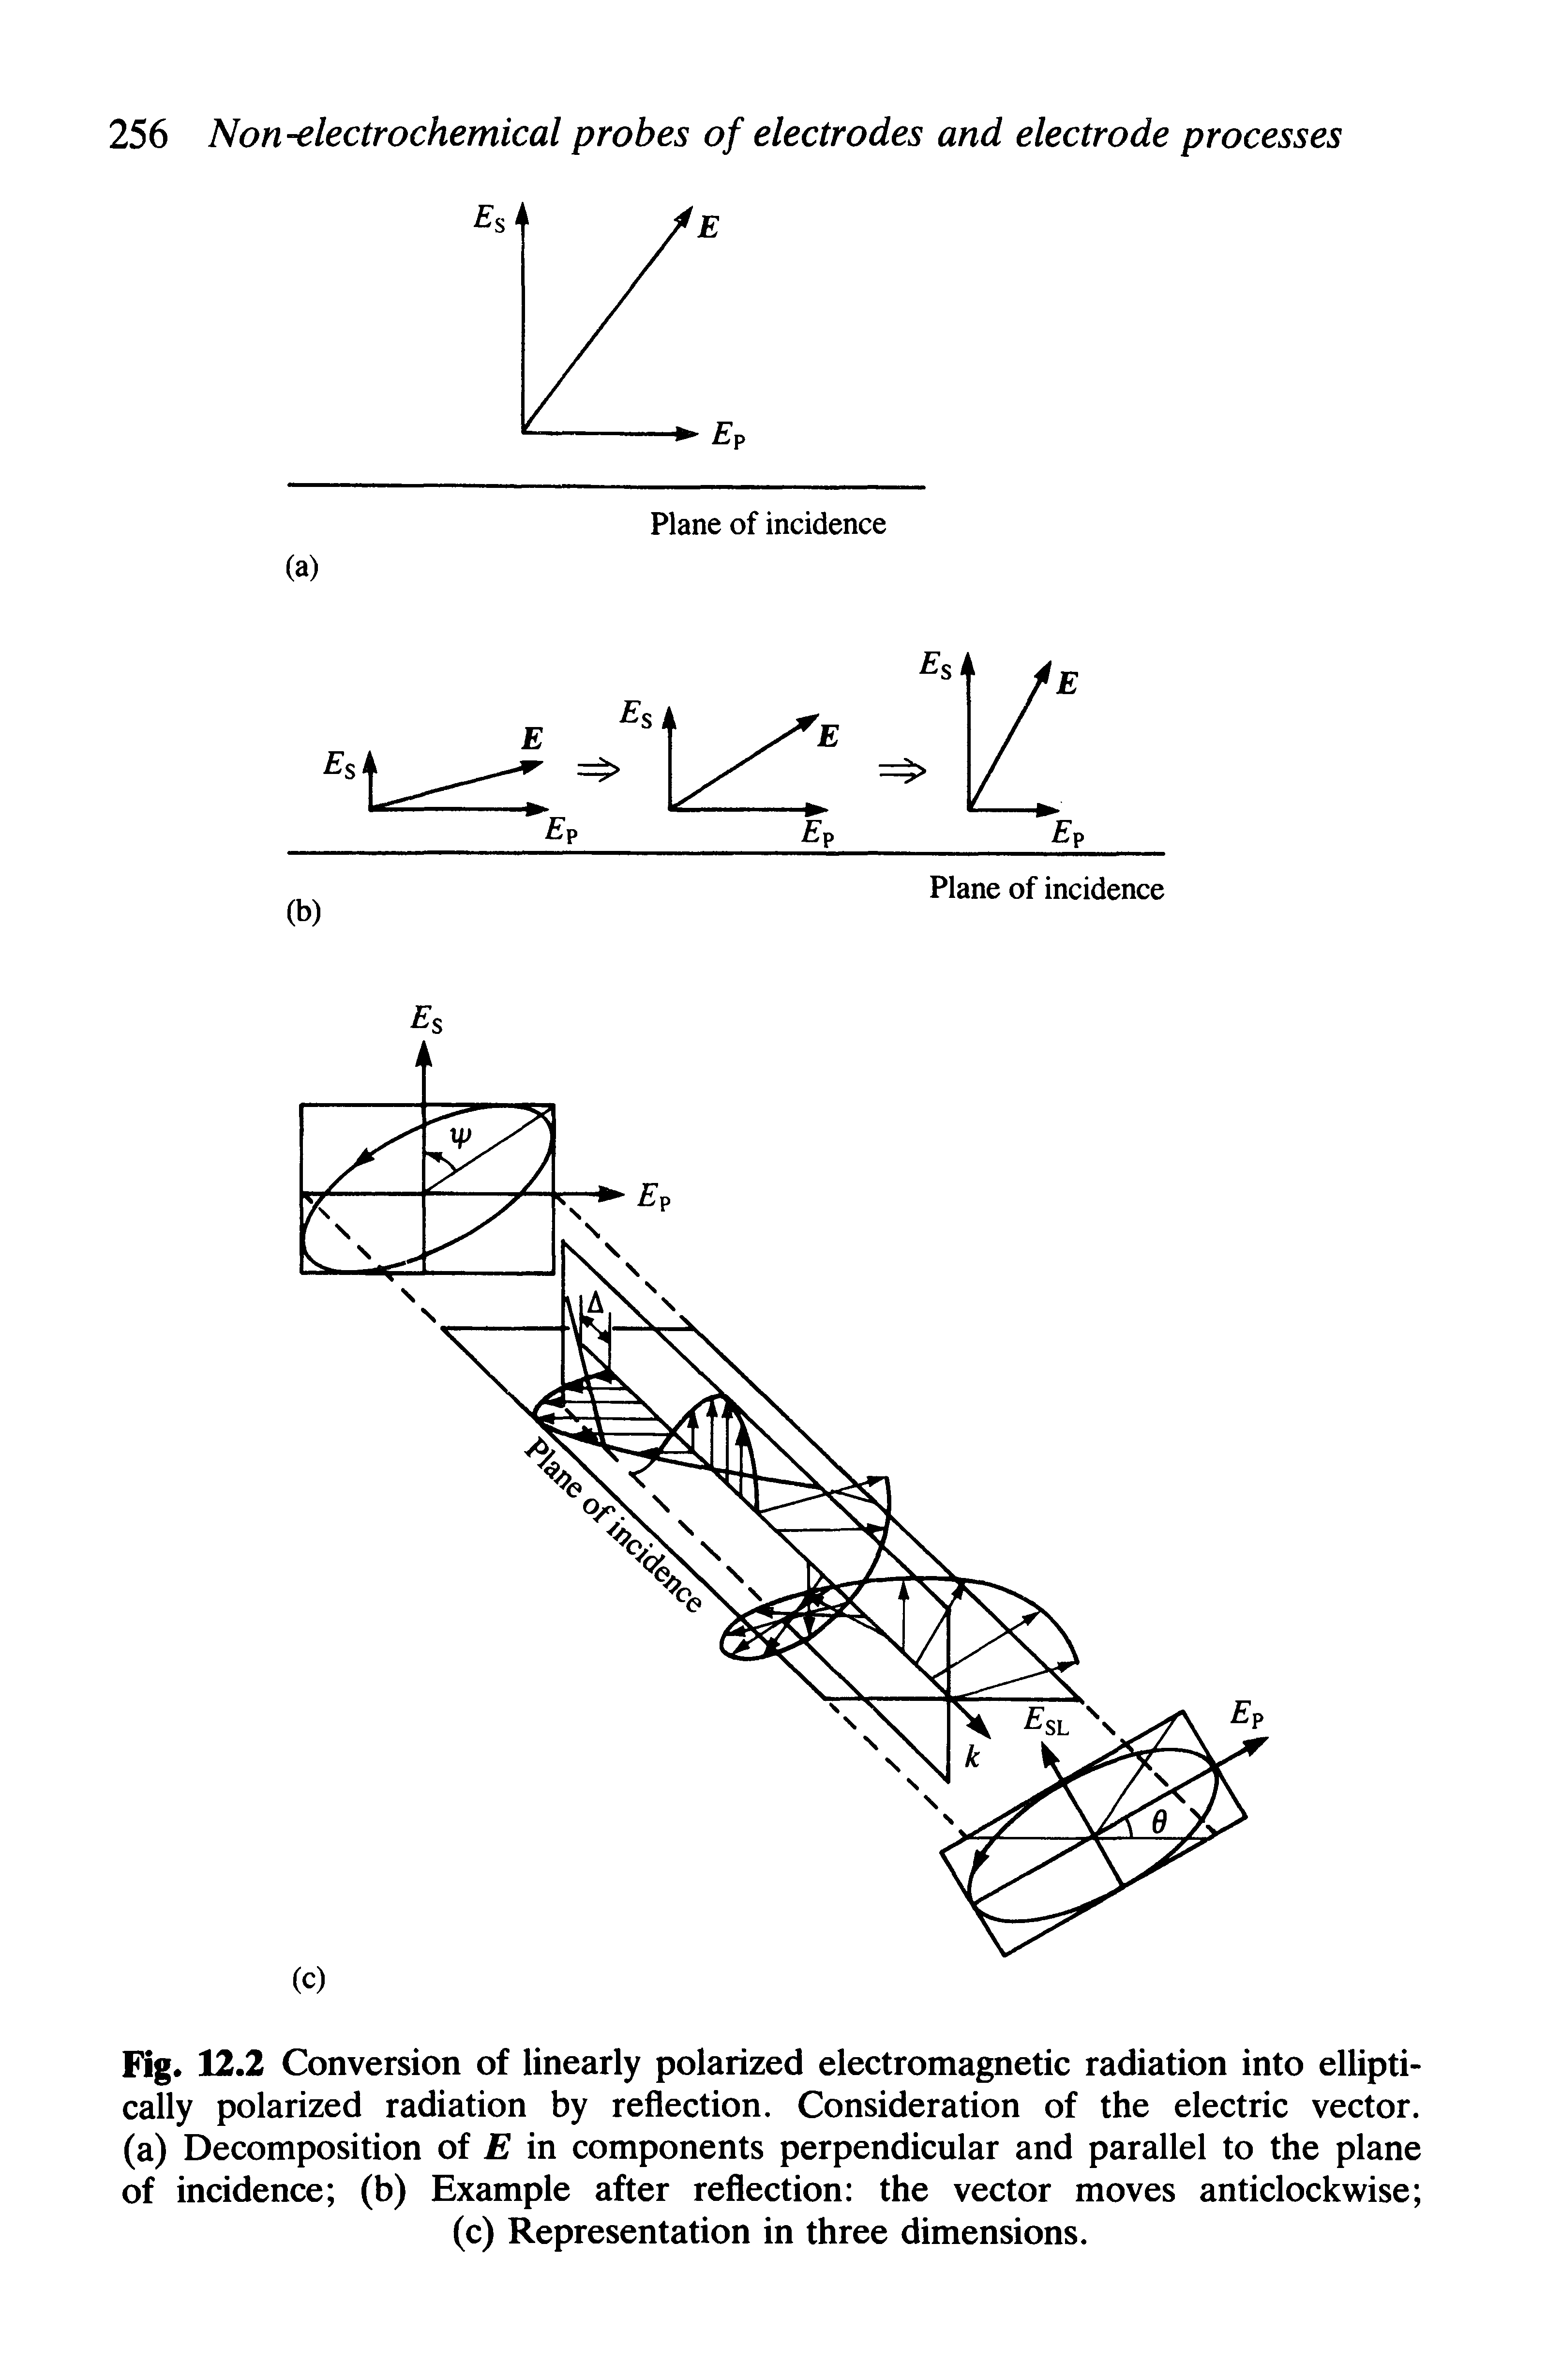 Fig. 12.2 Conversion of linearly polarized electromagnetic radiation into ellipti-cally polarized radiation by reflection. Consideration of the electric vector, (a) Decomposition of E in components perpendicular and parallel to the plane of incidence (b) Example after reflection the vector moves anticlockwise (c) Representation in three dimensions.